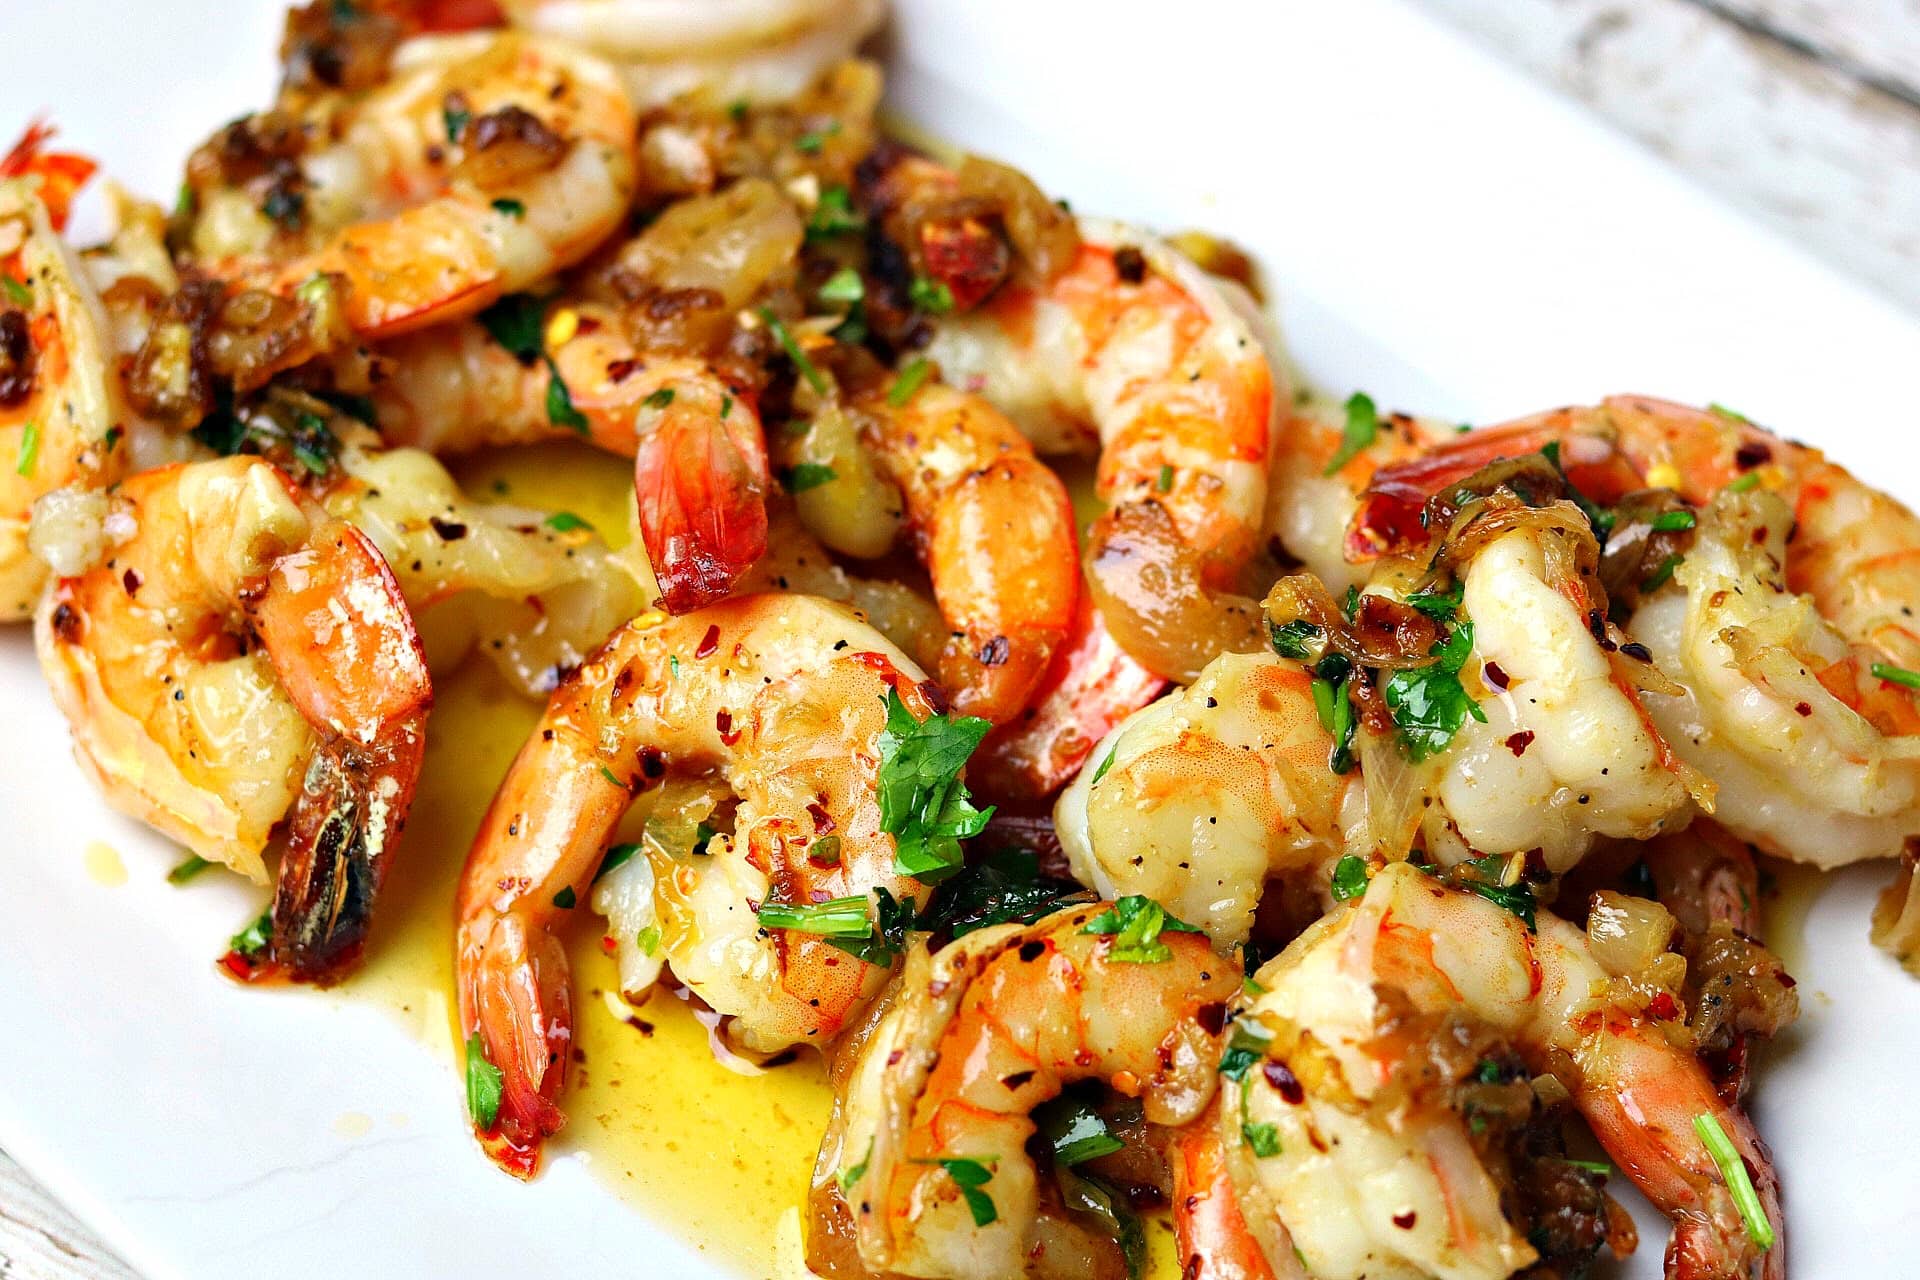 Our Most Shared Shrimp Scampi Appetizer Ever – Easy Recipes To Make at Home